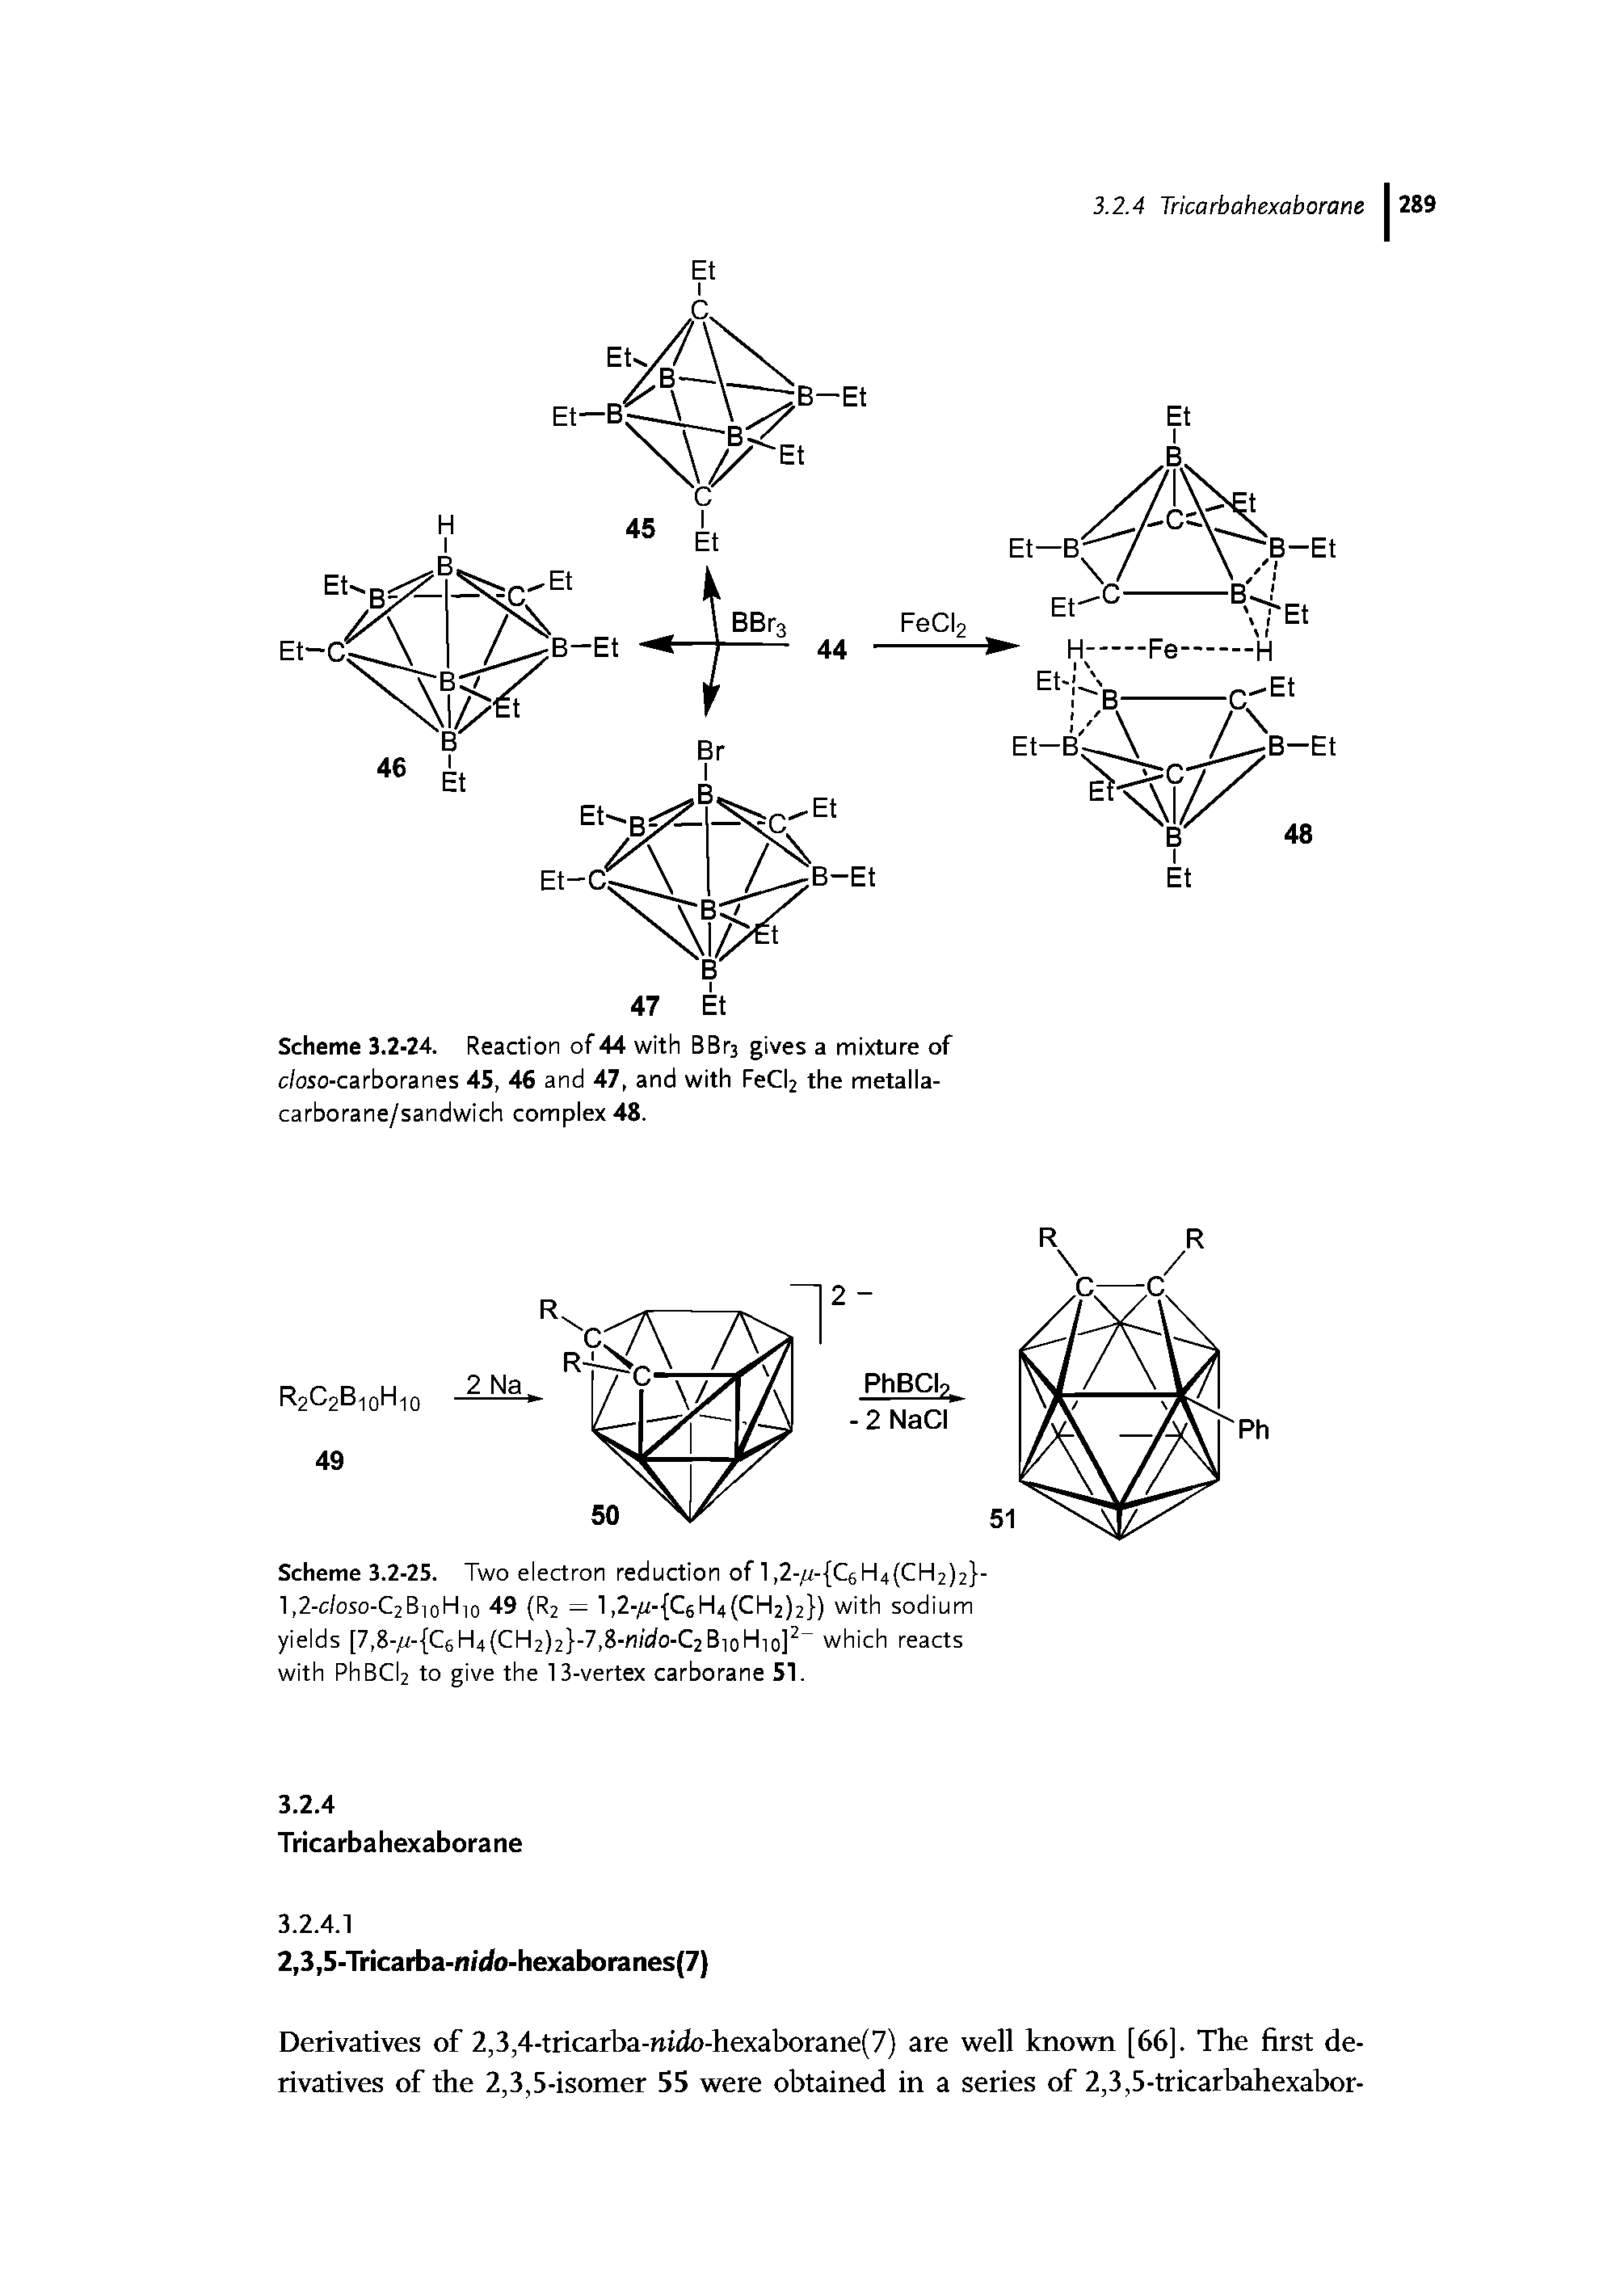 Scheme 3.2-24. Reaction of 44 with BBr3 gives a mixture of closo-carboranes 45, 46 and 47, and with FeCI2 the metalla-carborane/sandwich complex 48.